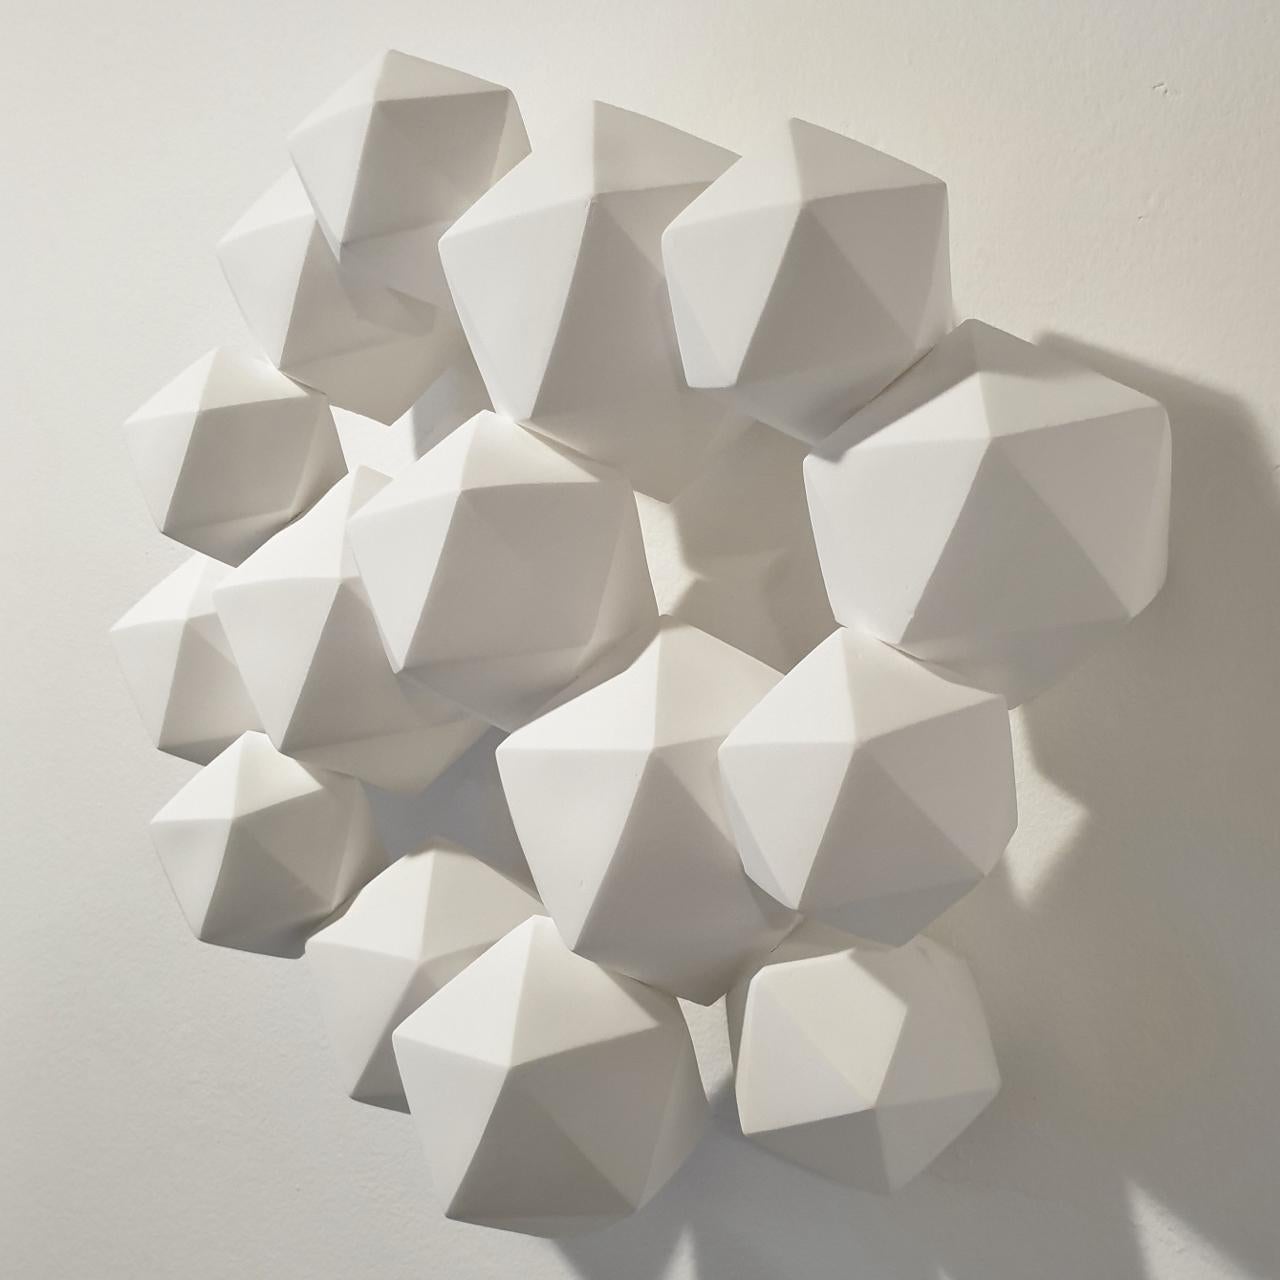 Halfway - contemporary modern abstract geometric ceramic wall sculpture - Abstract Geometric Sculpture by Mo Cornelisse